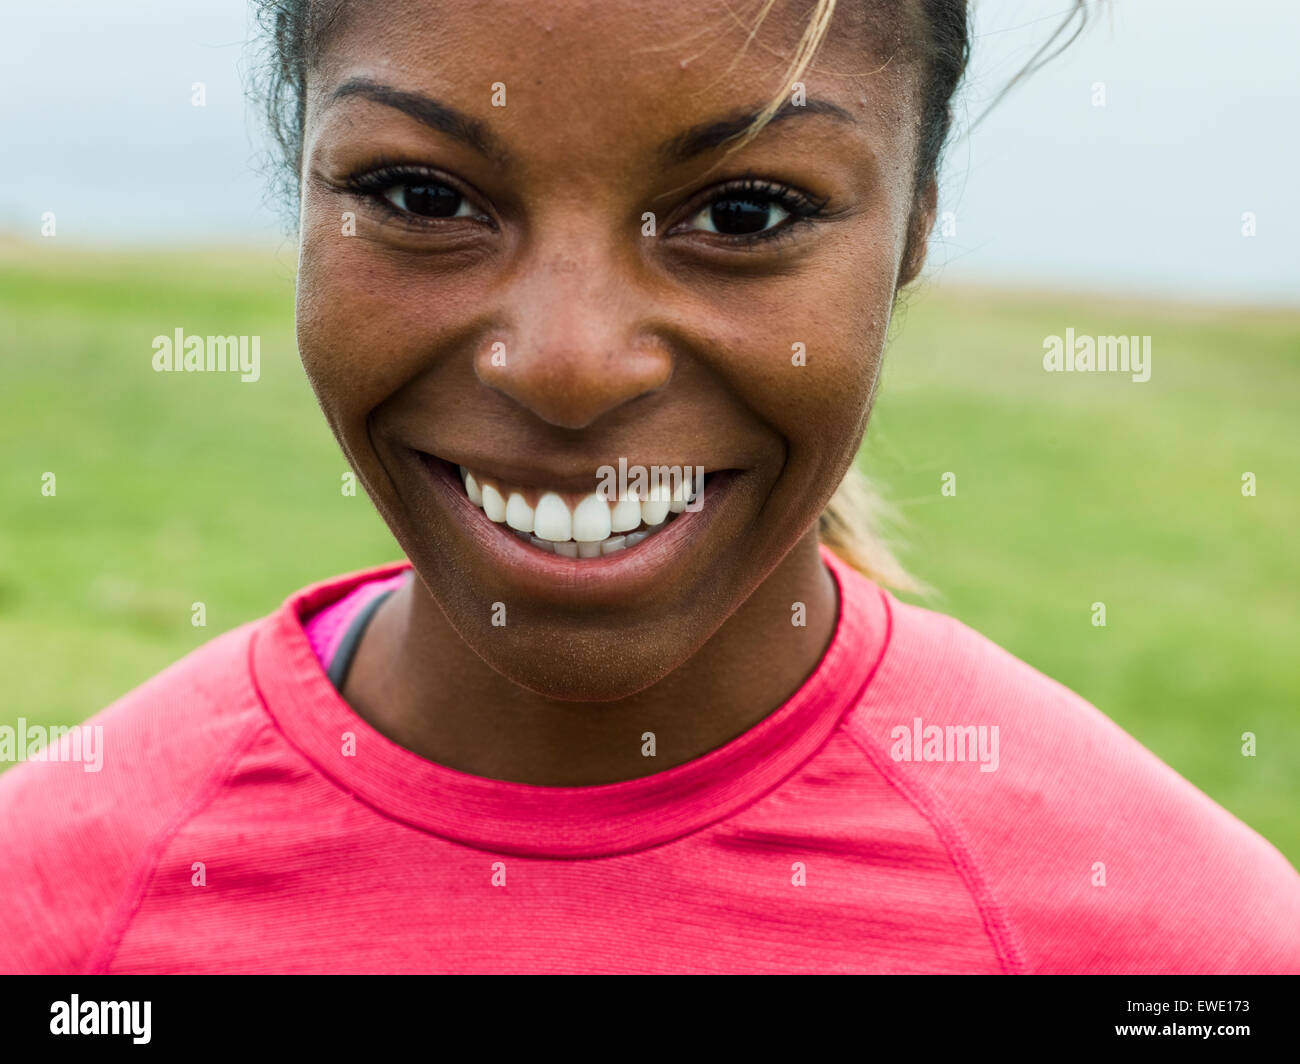 Portrait of a smiling young woman jogger Stock Photo